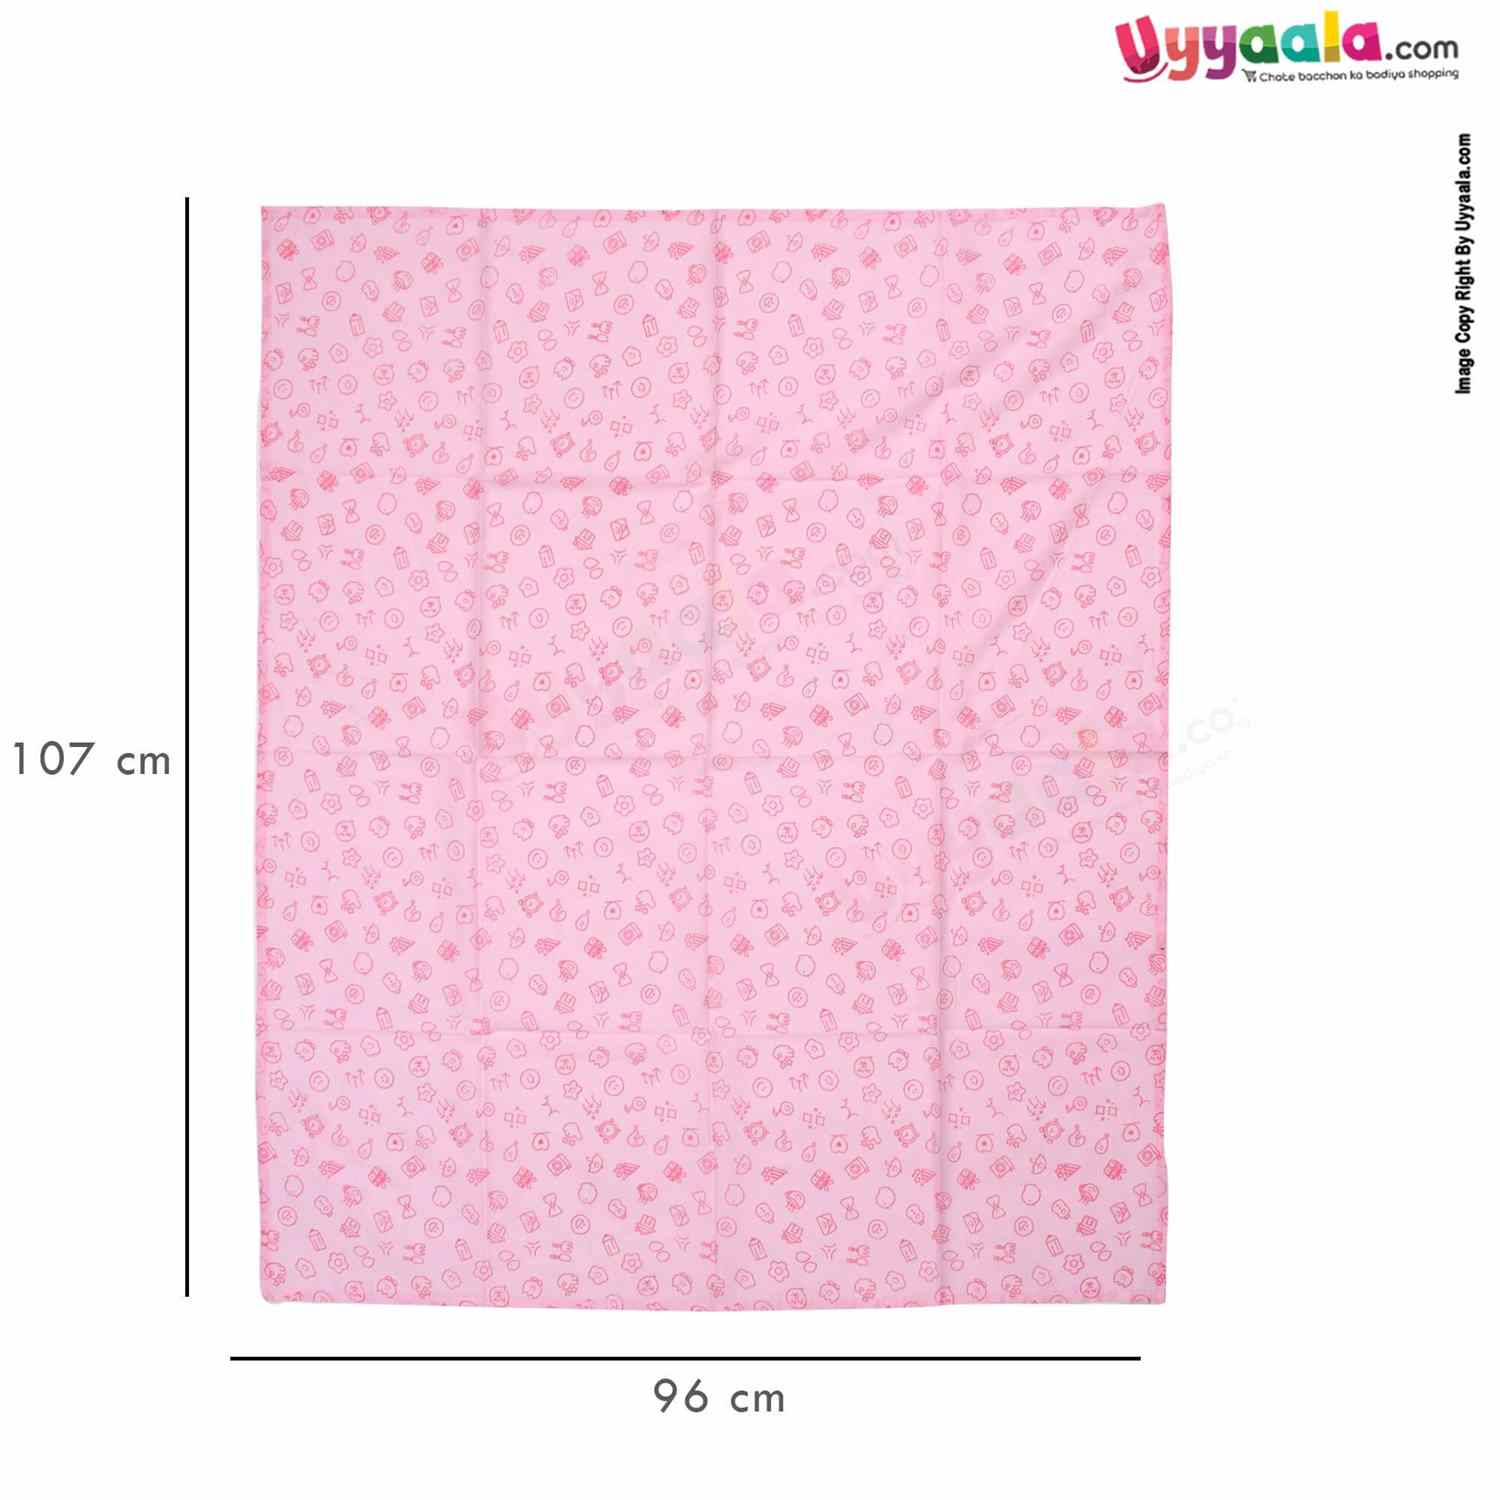 Cotton Wrapper Muslin Cloth With Smiley & Star Print Pack of 2, 0+m Age, Yellow & Pink